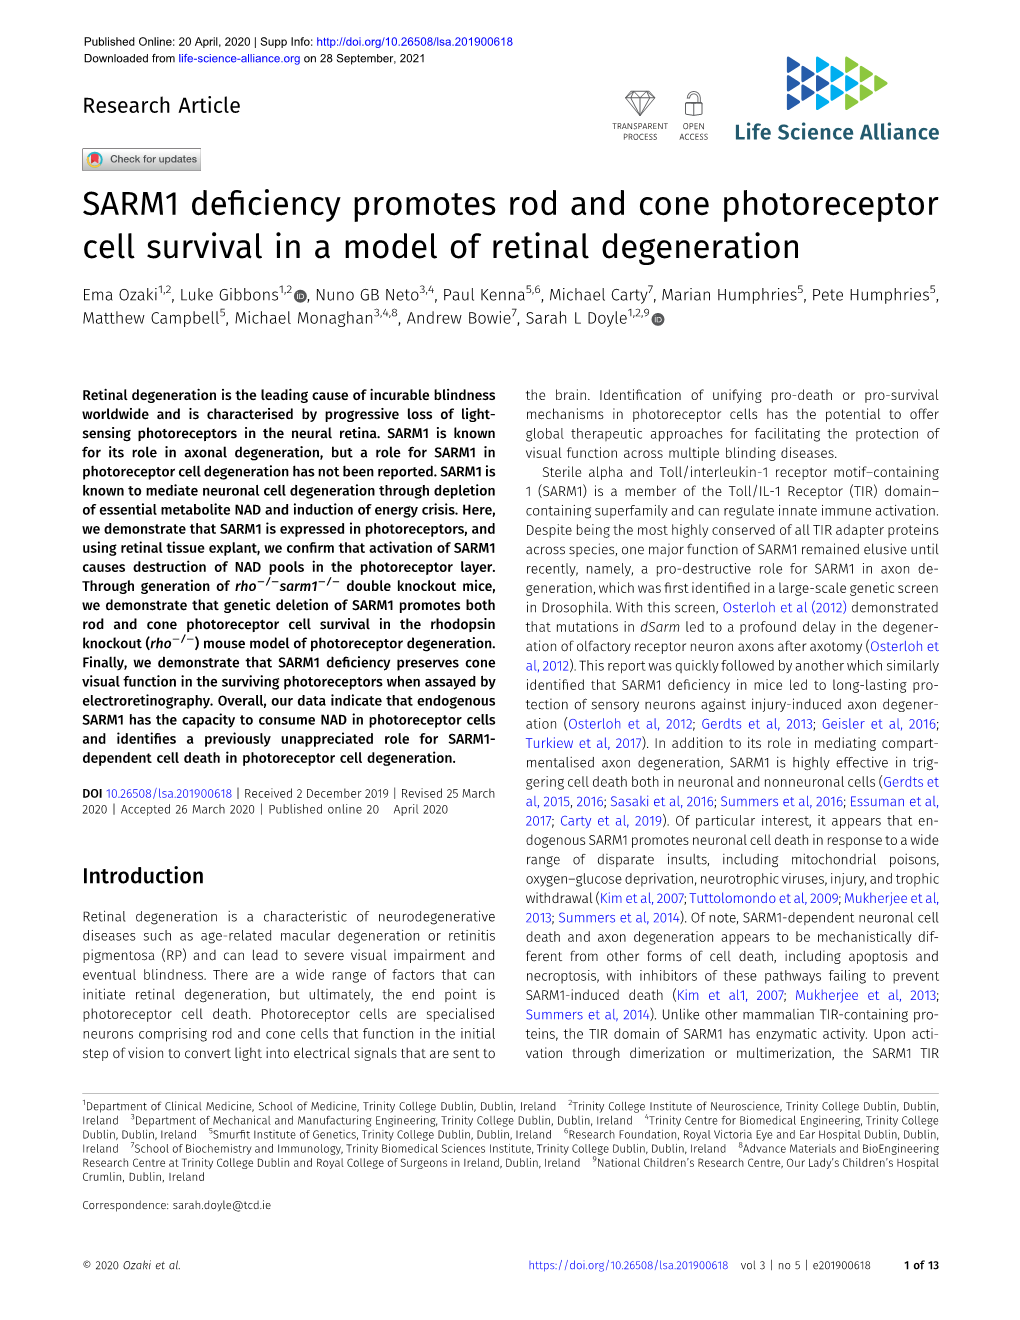 SARM1 Deficiency Promotes Rod and Cone Photoreceptor Cell Survival in a Model of Retinal Degeneration